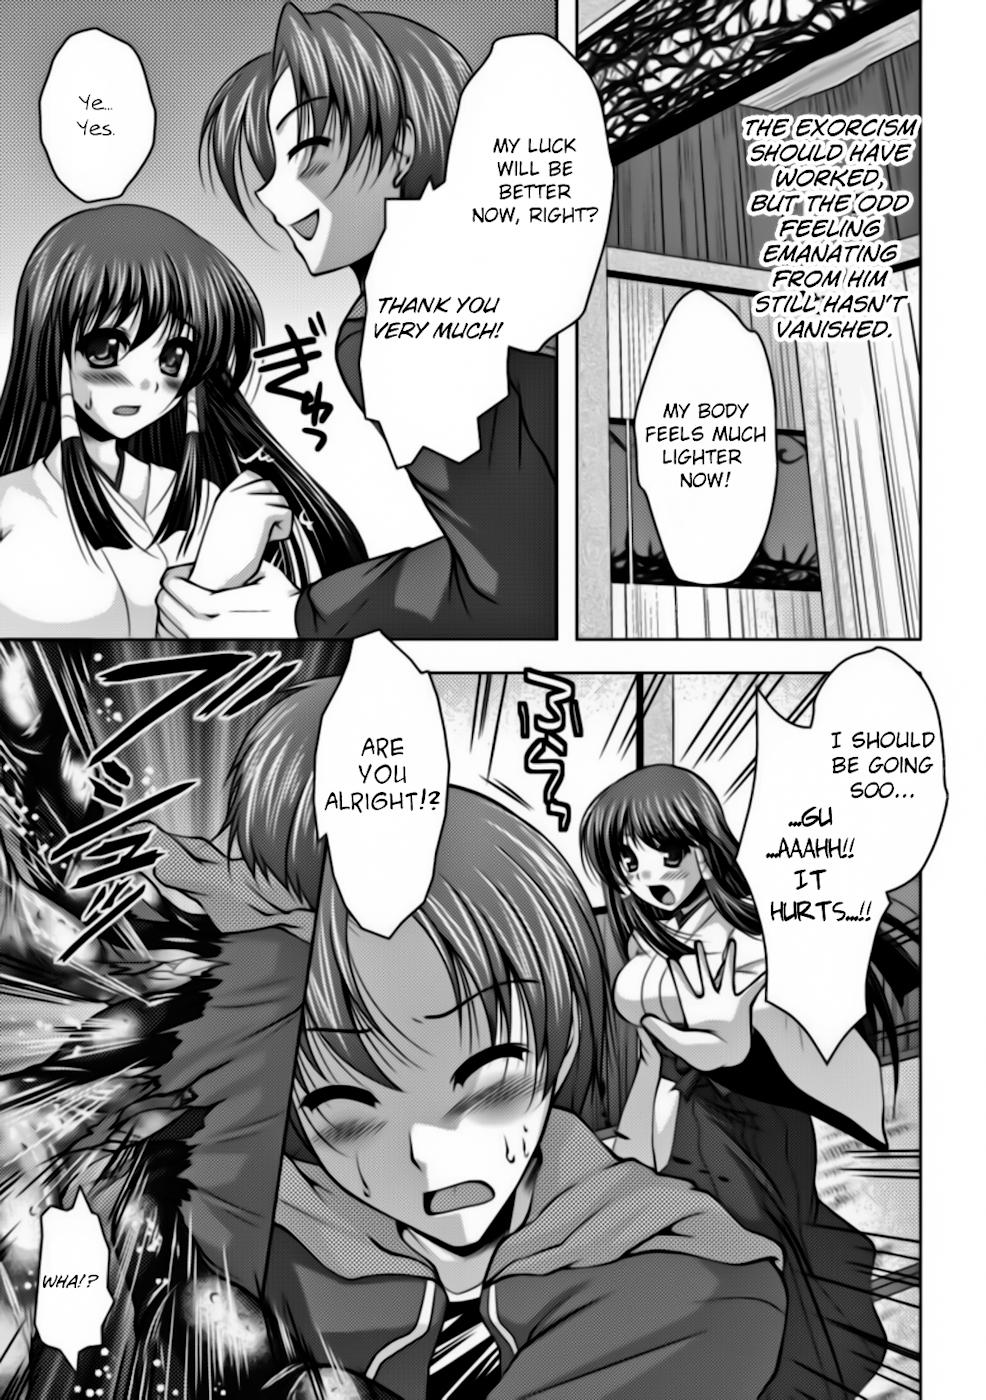 Food Chakusou Play Ch. 4 "Exorcist Miko" Double Blowjob - Page 4